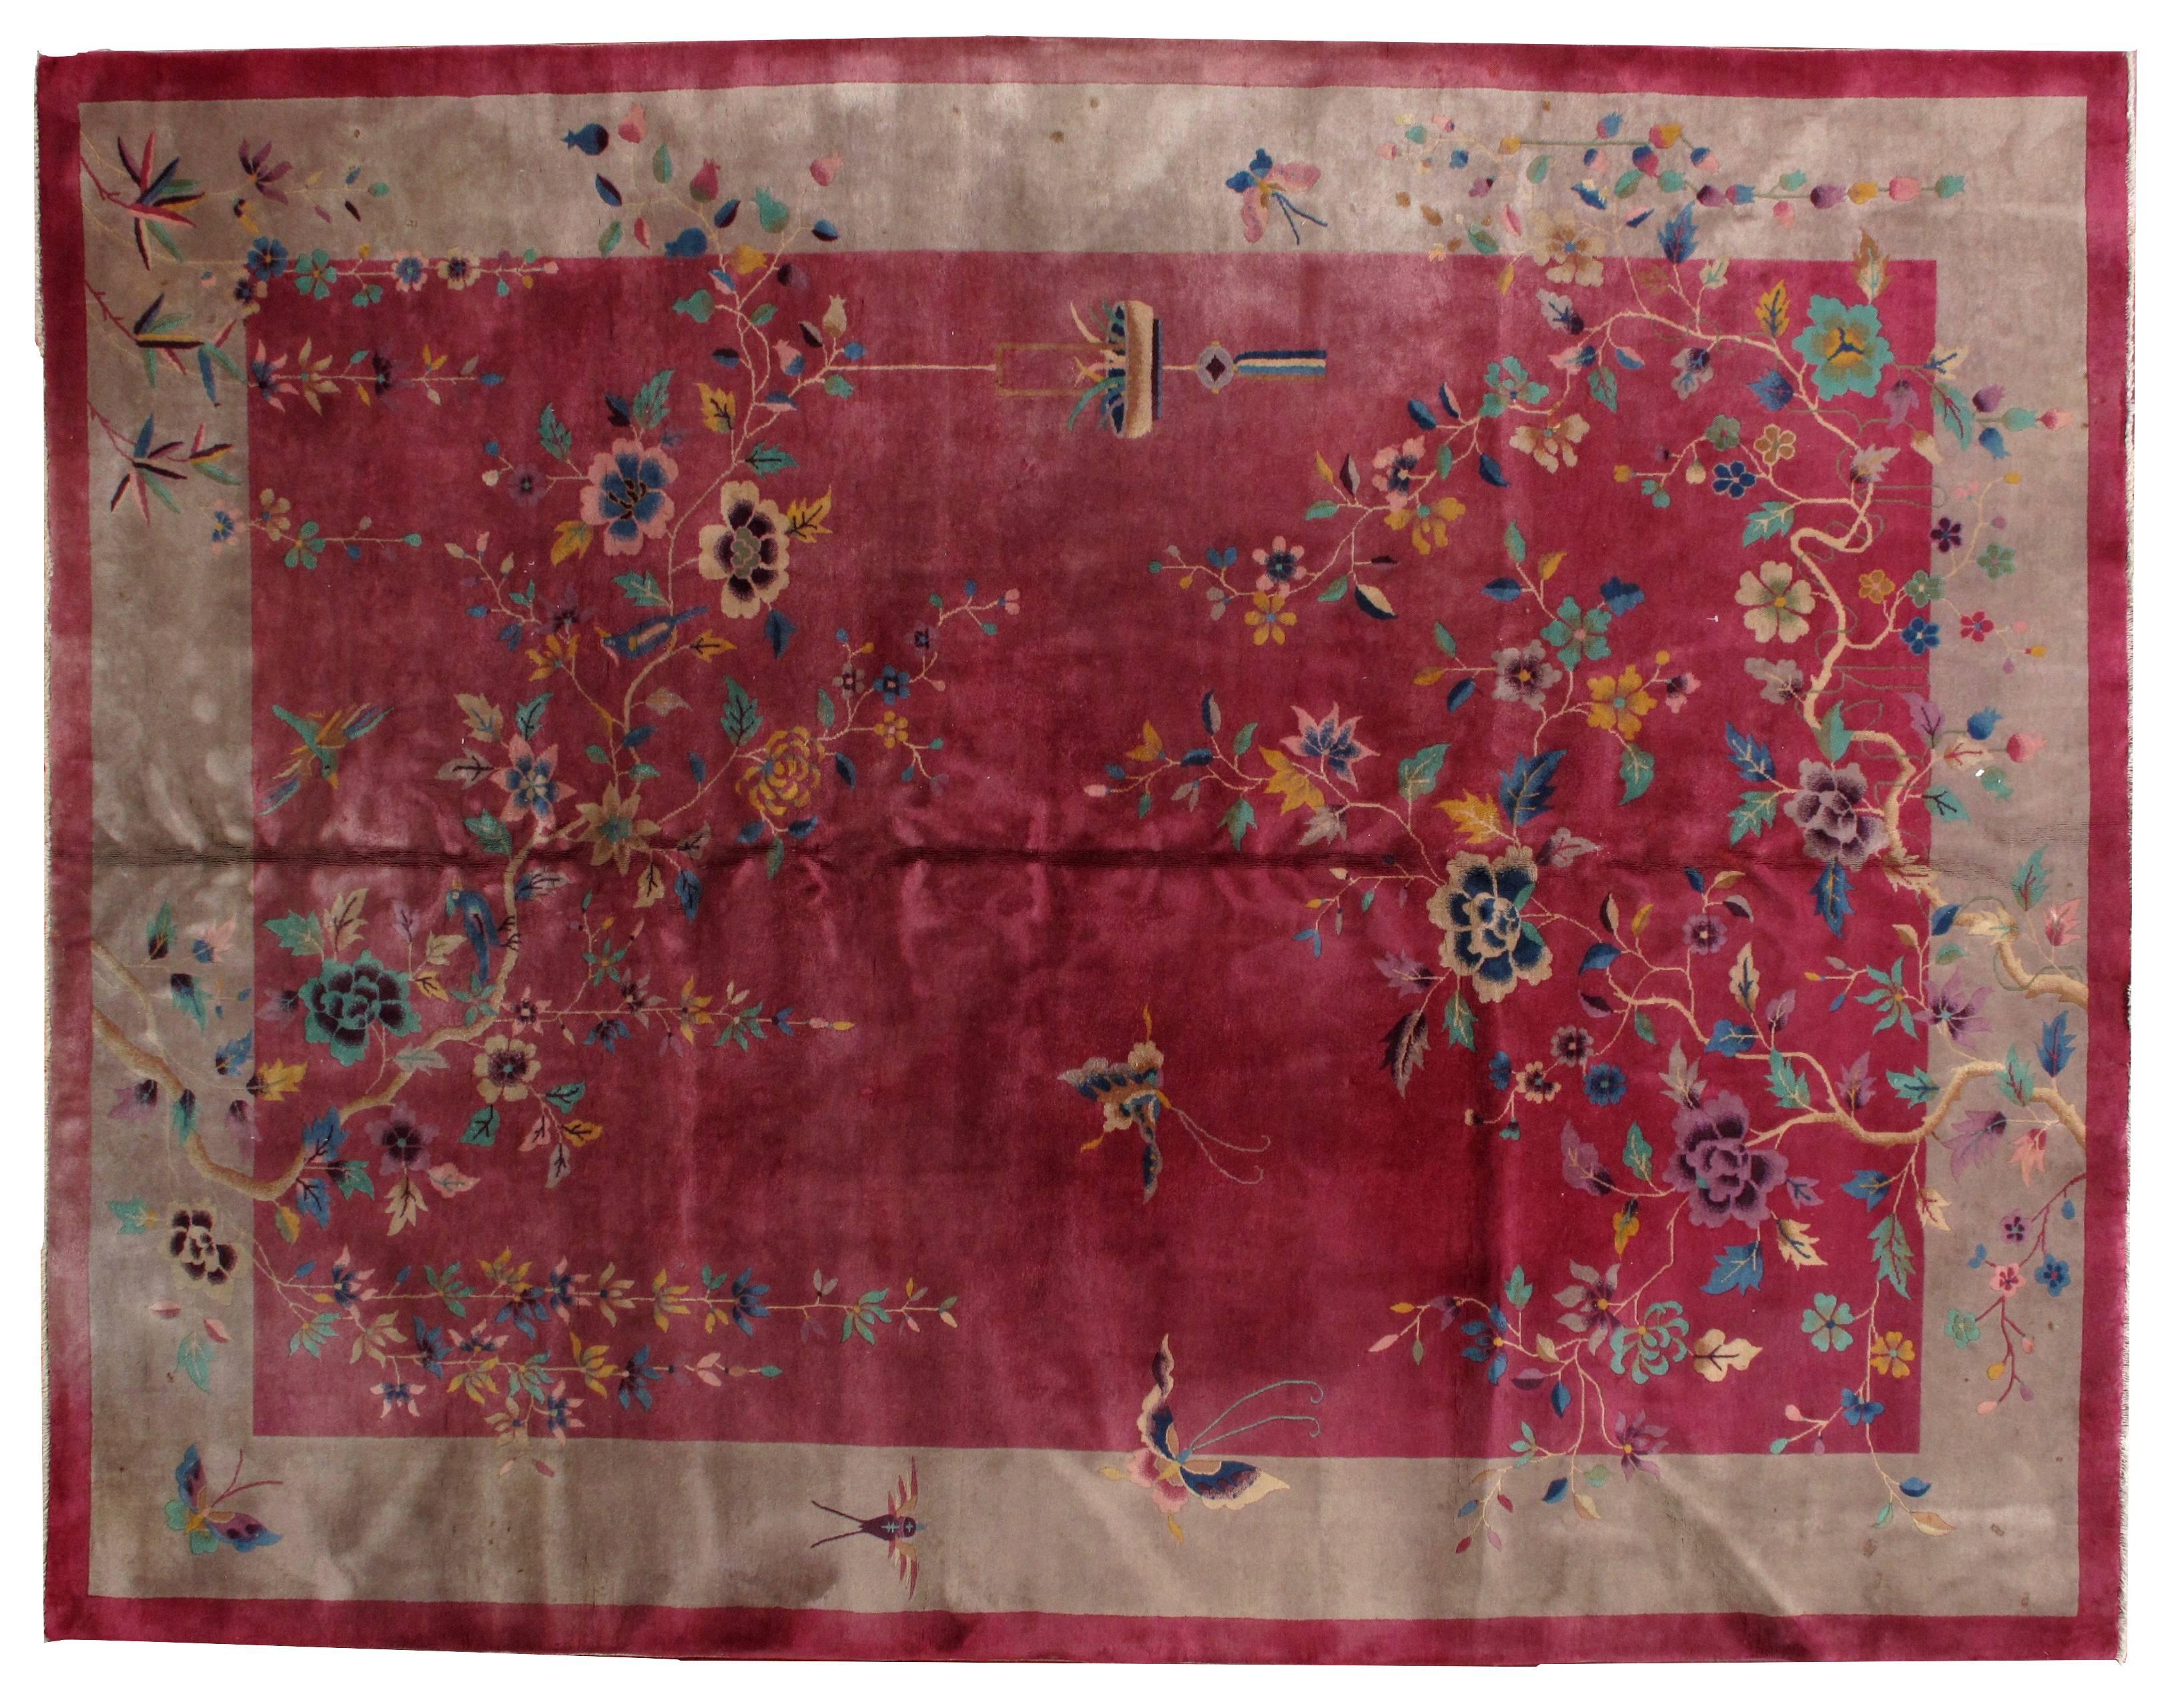 Antique Art Deco Chinese rug in original condition. The rug is made in fuchsia color with cream beige border. Beautiful Art Deco design decorating the rug with the branches full of large colorful flowers and butterflies. The rug is in original good